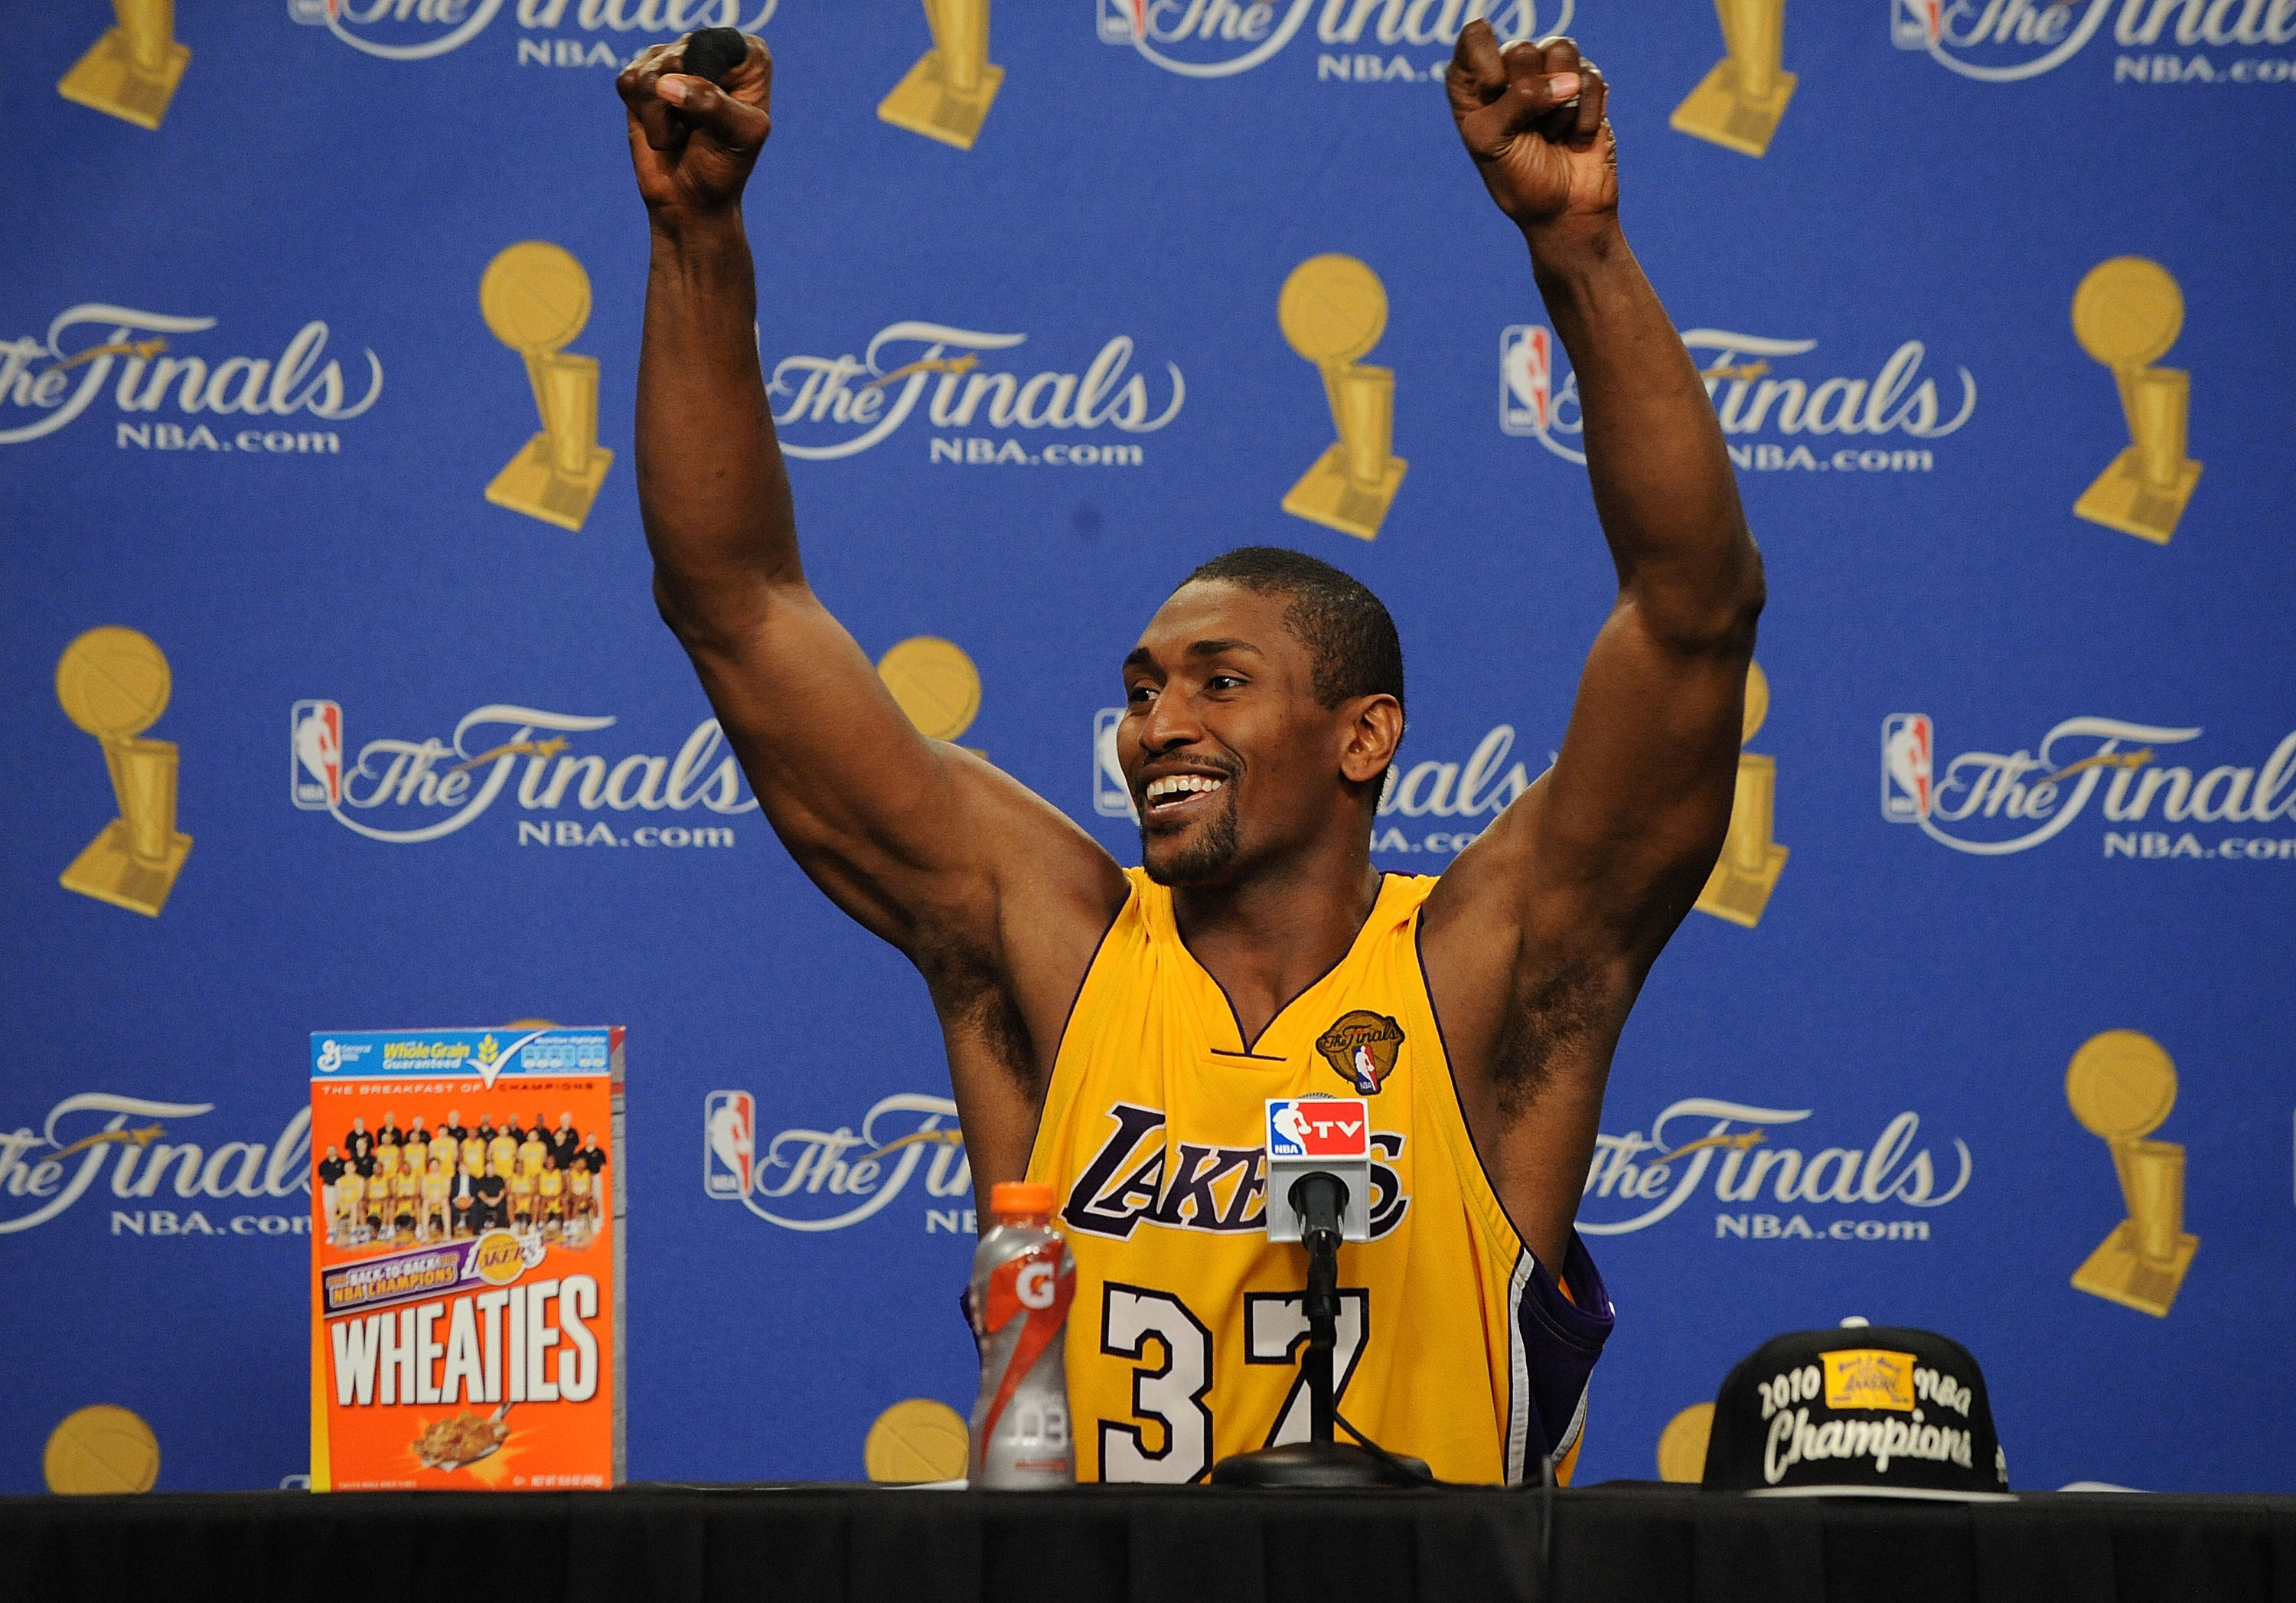 LOS ANGELES, CA - JUNE 17:  Ron Artest #37 of the Los Angeles Lakers speaks during the post game news conference as he celebrates after the Lakers defeated the Boston Celtics 83-79 in Game Seven of the 2010 NBA Finals at Staples Center on June 17, 2010 in